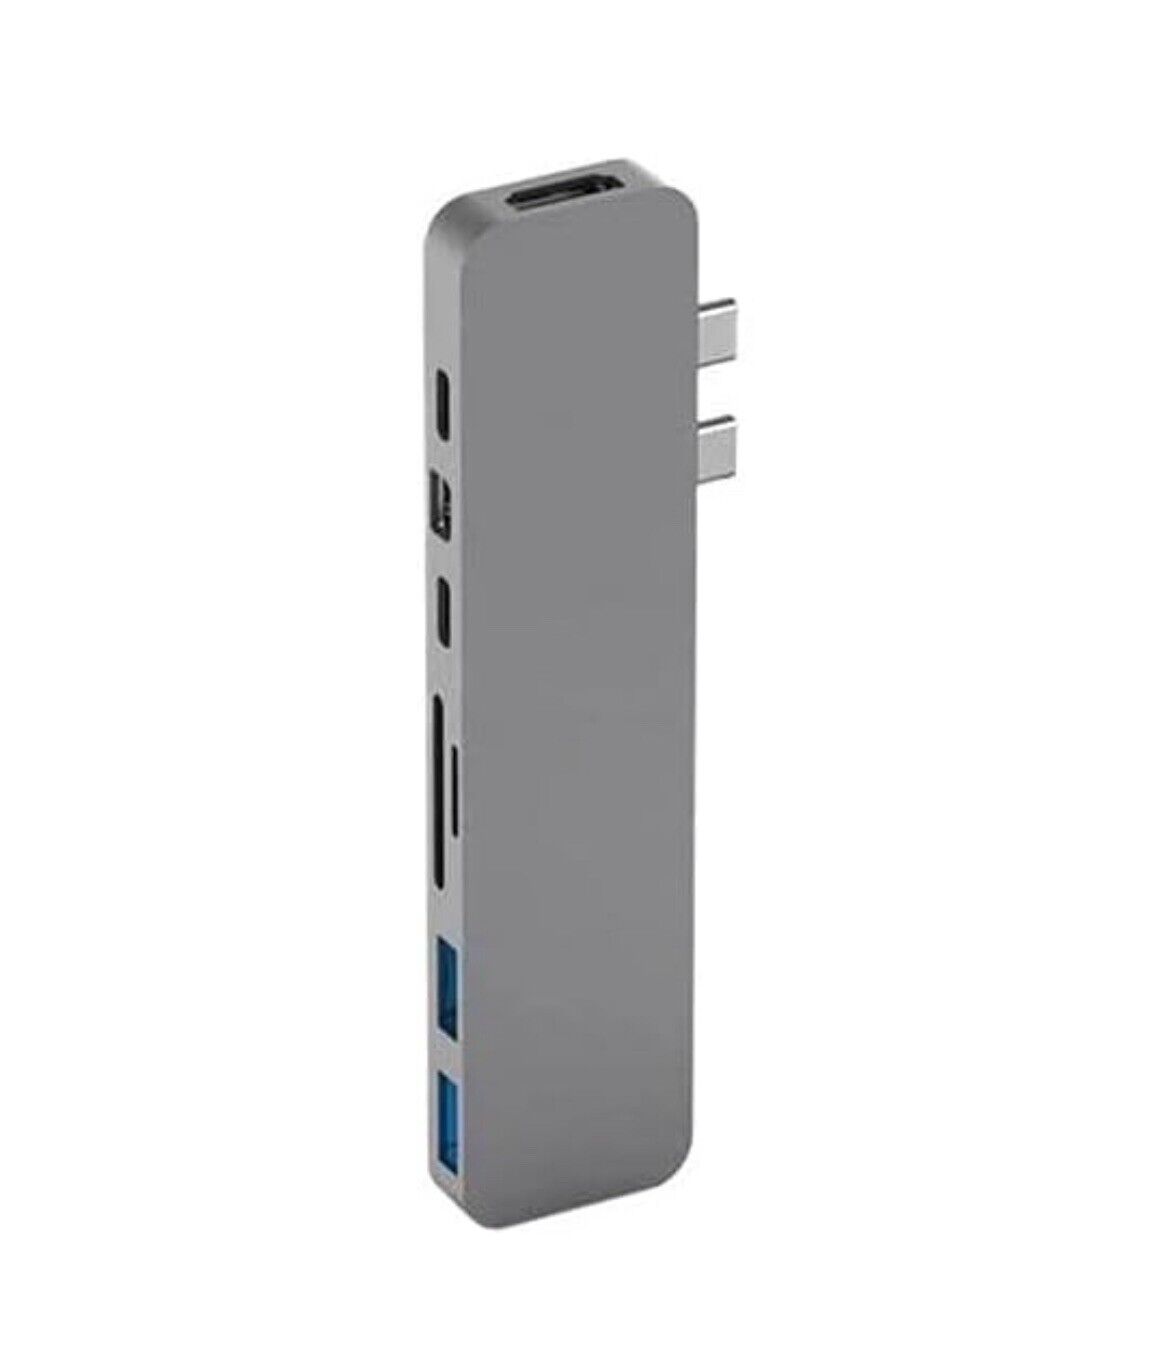 Hyper HyperDrive PRO 8in2 USB TypeC Hub Space Gray - Compatible with M1/M2 Macs